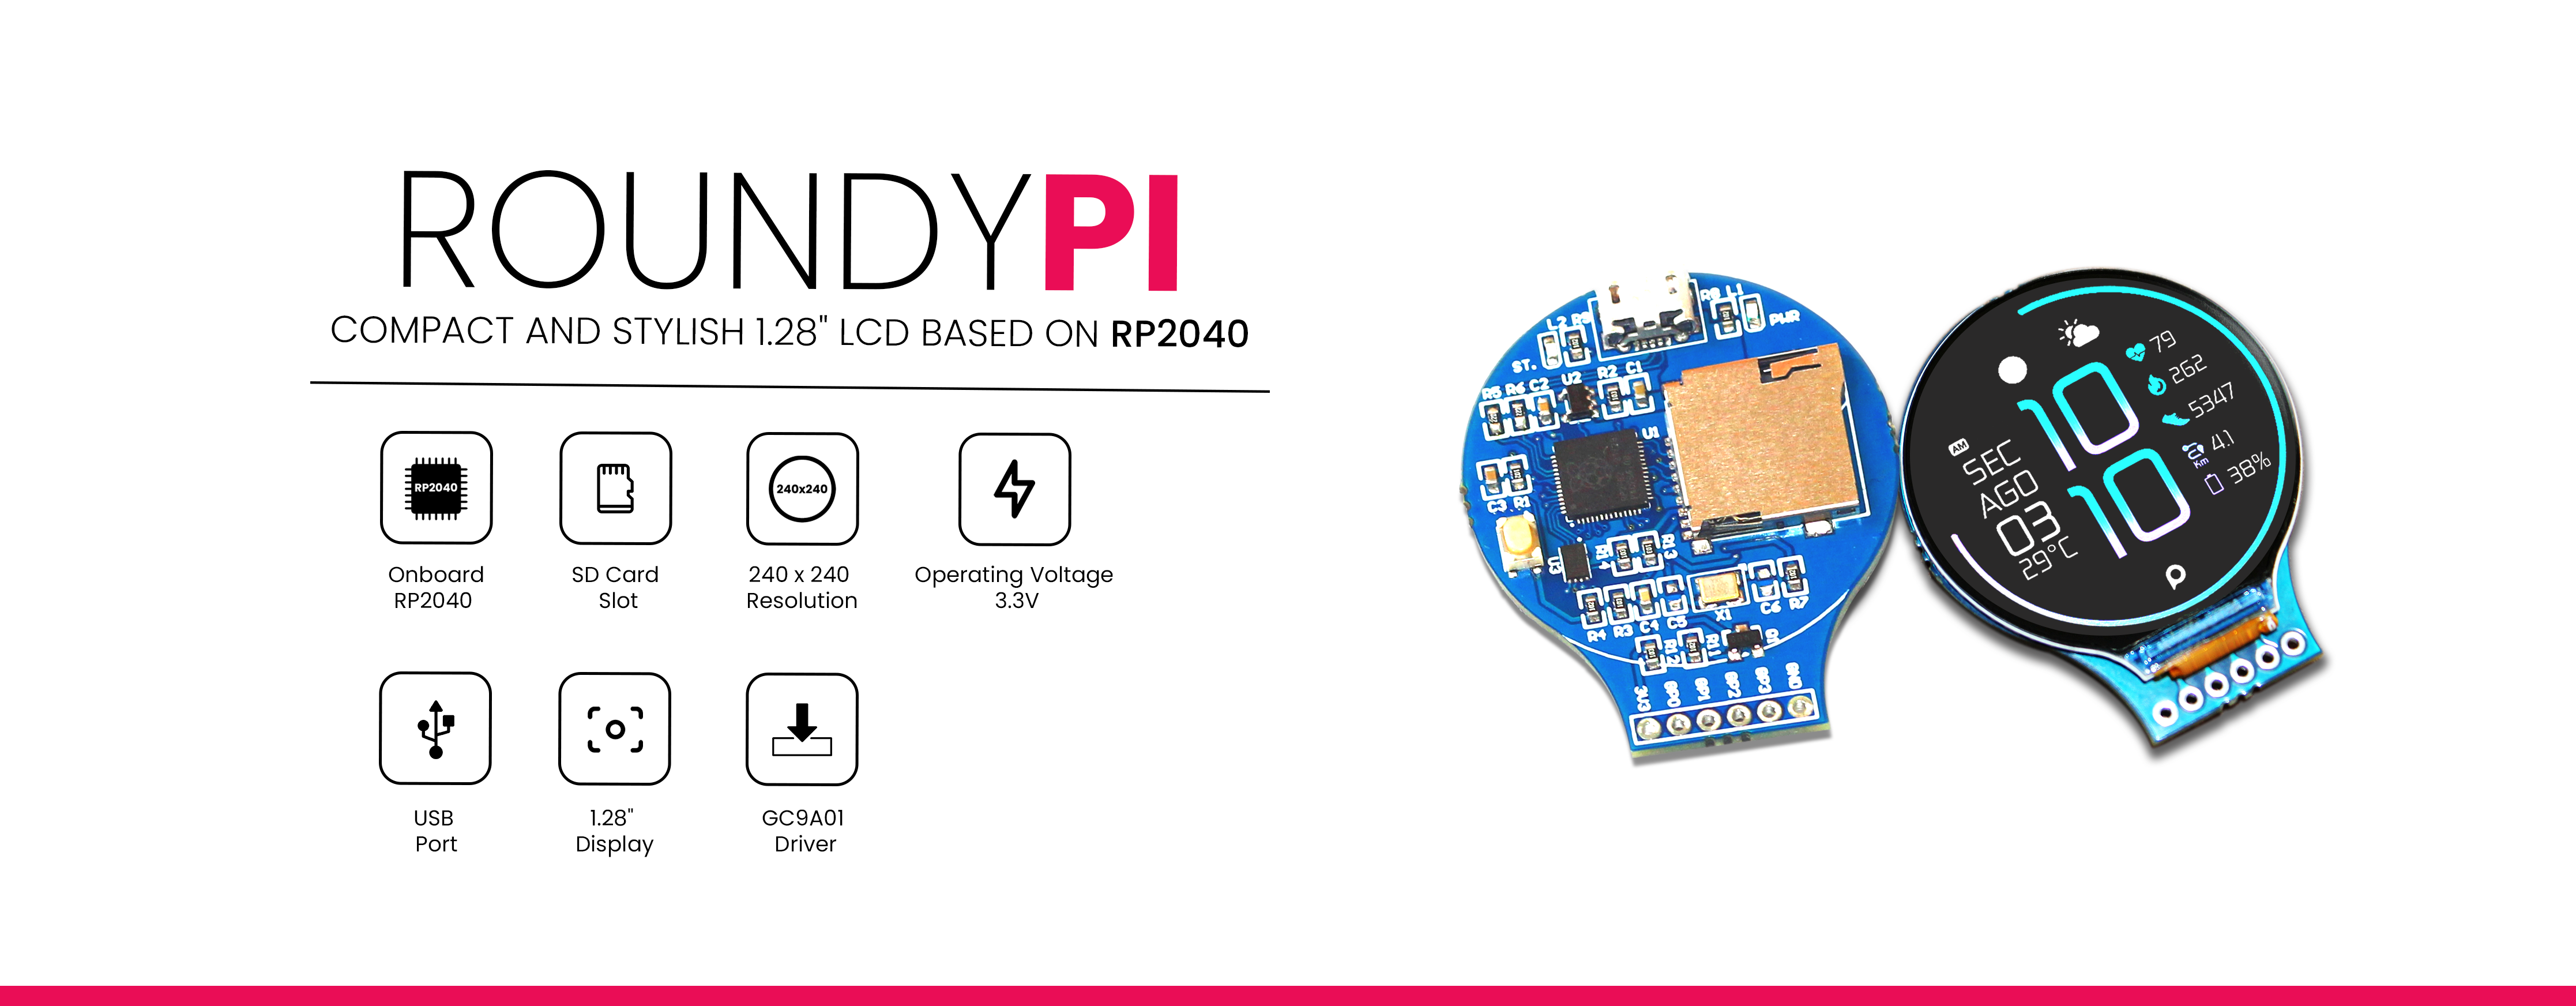 RoundyPi Round LCD Based on RP2040 microcontroller